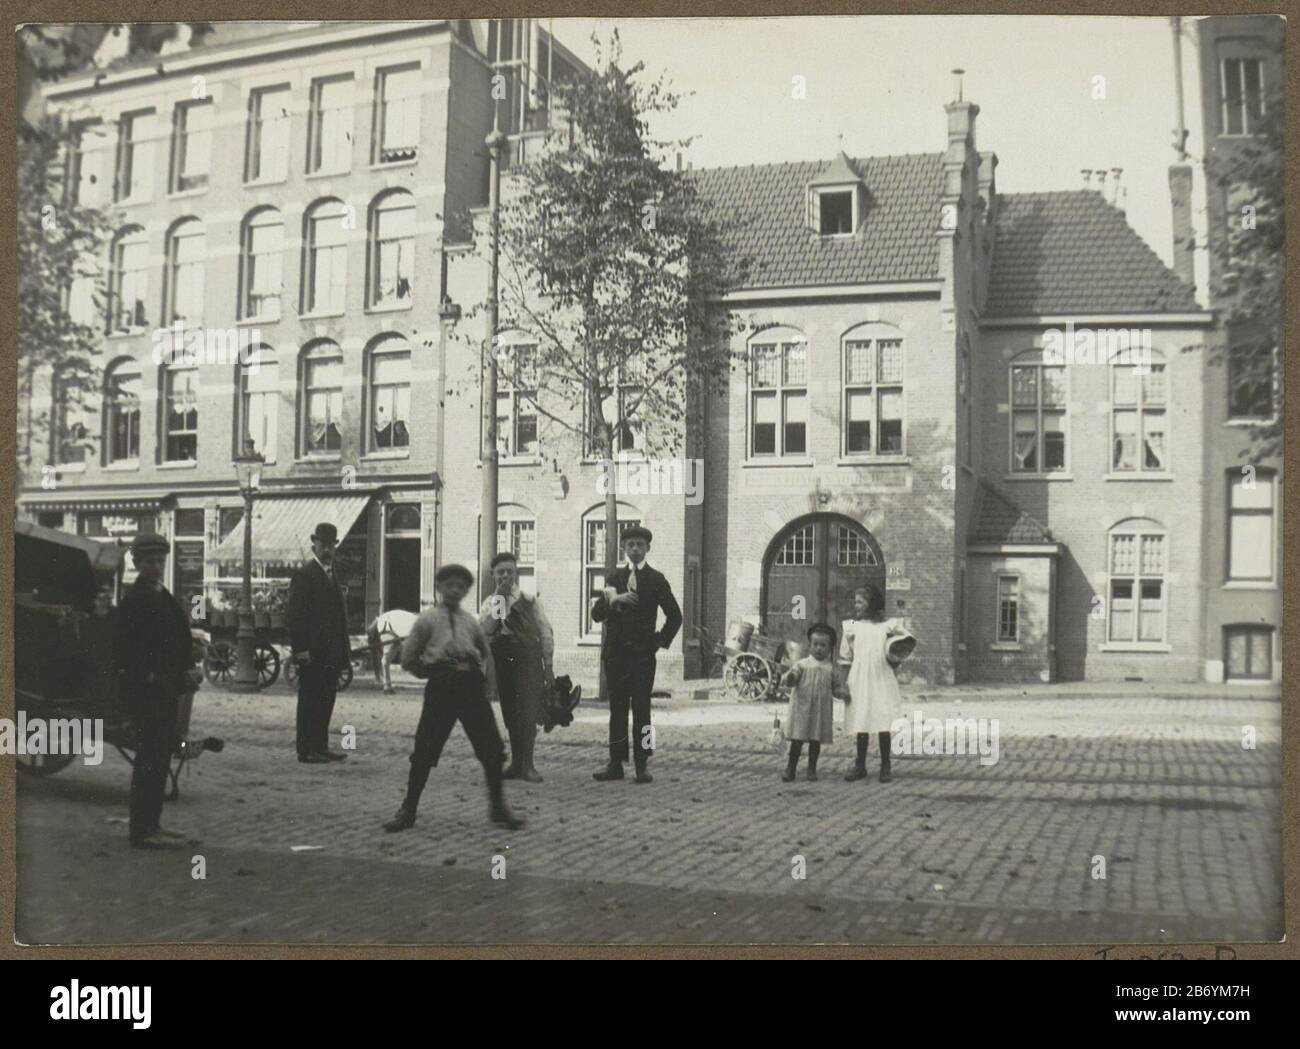 provincie Arashigaoka Bezwaar Kinderen voor het Catharinahofje aan de Amsterdamse Overtoom Part of album  with pictures of Amsterdam and omge. Manufacturer : Photographer: anonymous  place manufacture: Amsterdam Date: 1900 - ca. 1930 Physical features:  gelatin